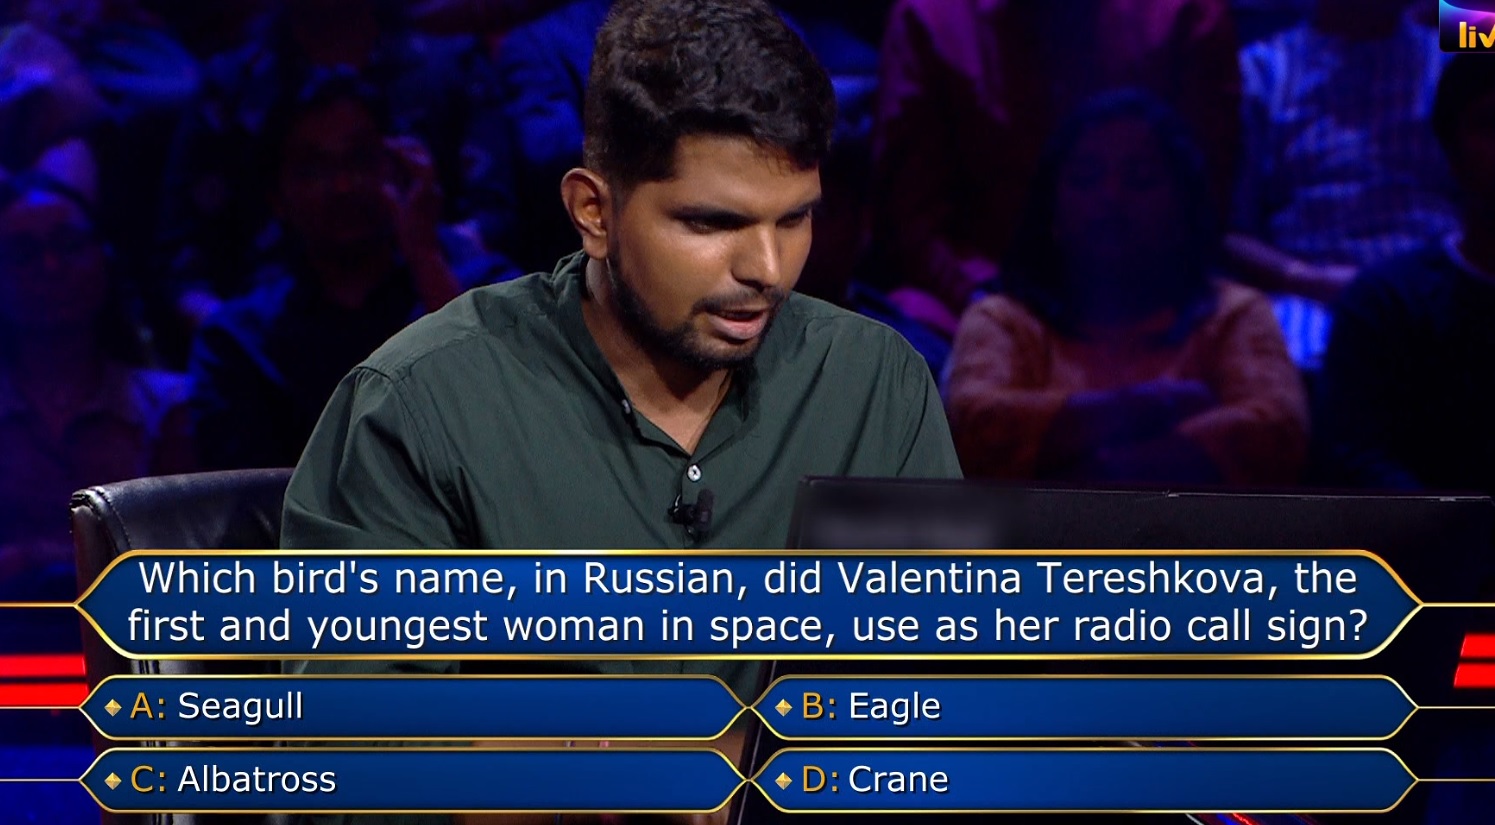 Ques : Which bird’s name, in Russian, did Valentina Tereshkova, the first and youngest woman in space, use as her radio call sign?